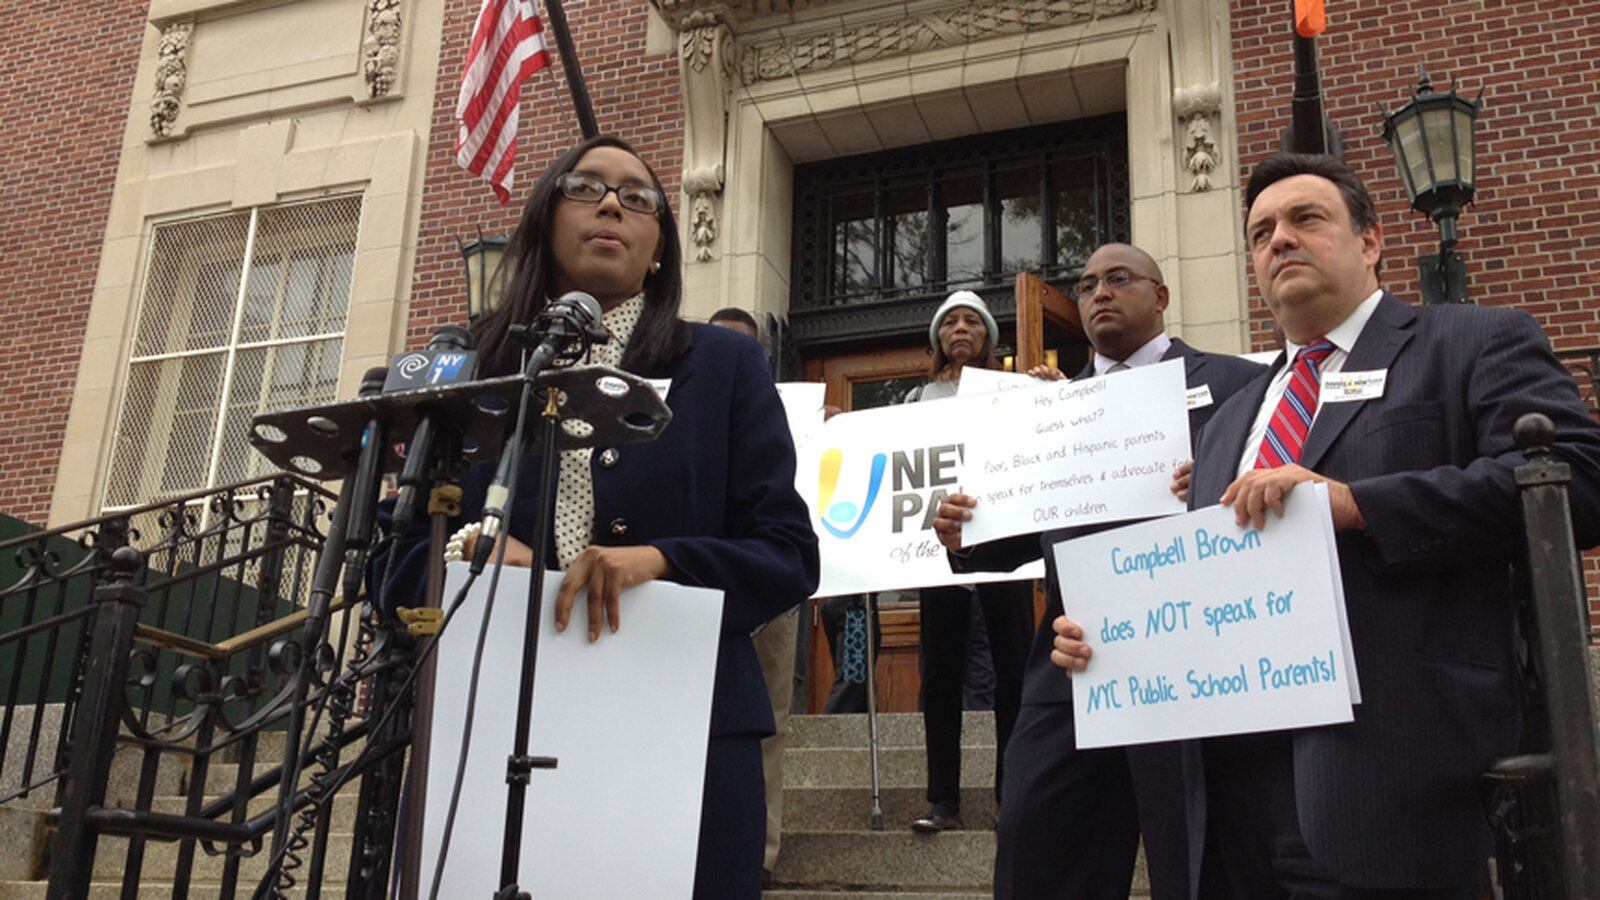 Mona Davids (left) is a plaintiff in a lawsuit challenging New York's job-protection laws for teachers.